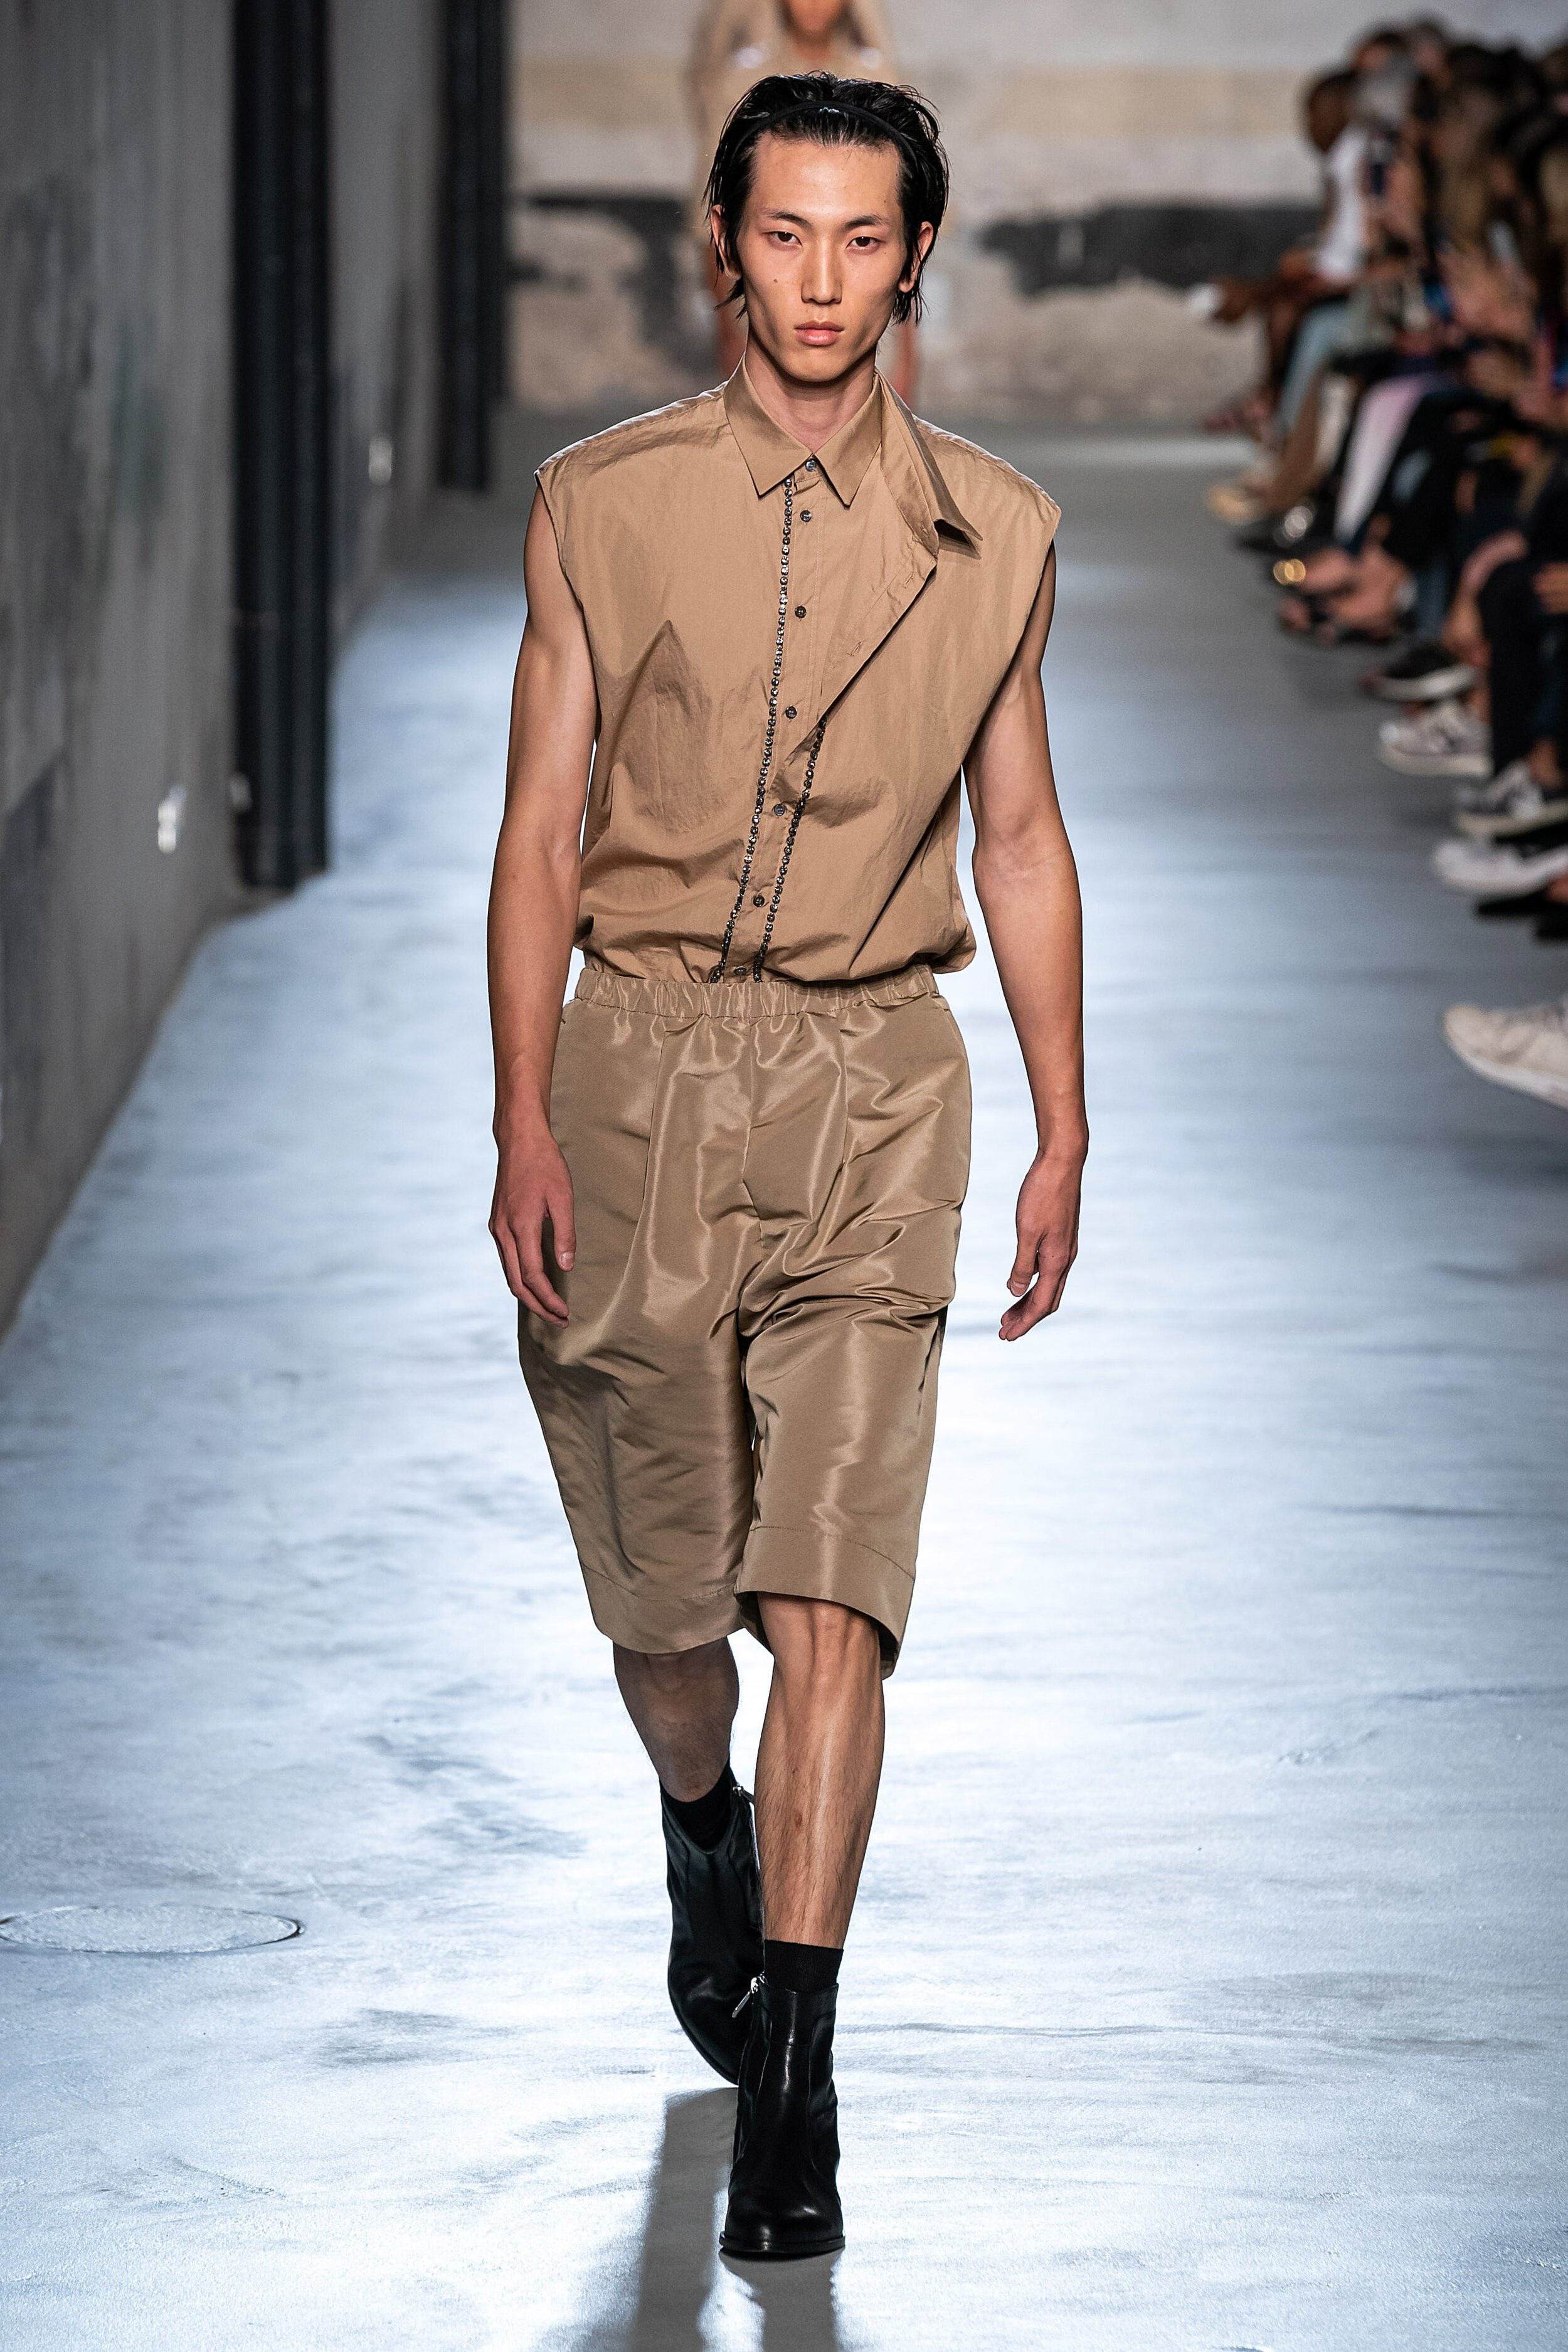 No. 21 SPRING 2020 READY-TO-WEAR